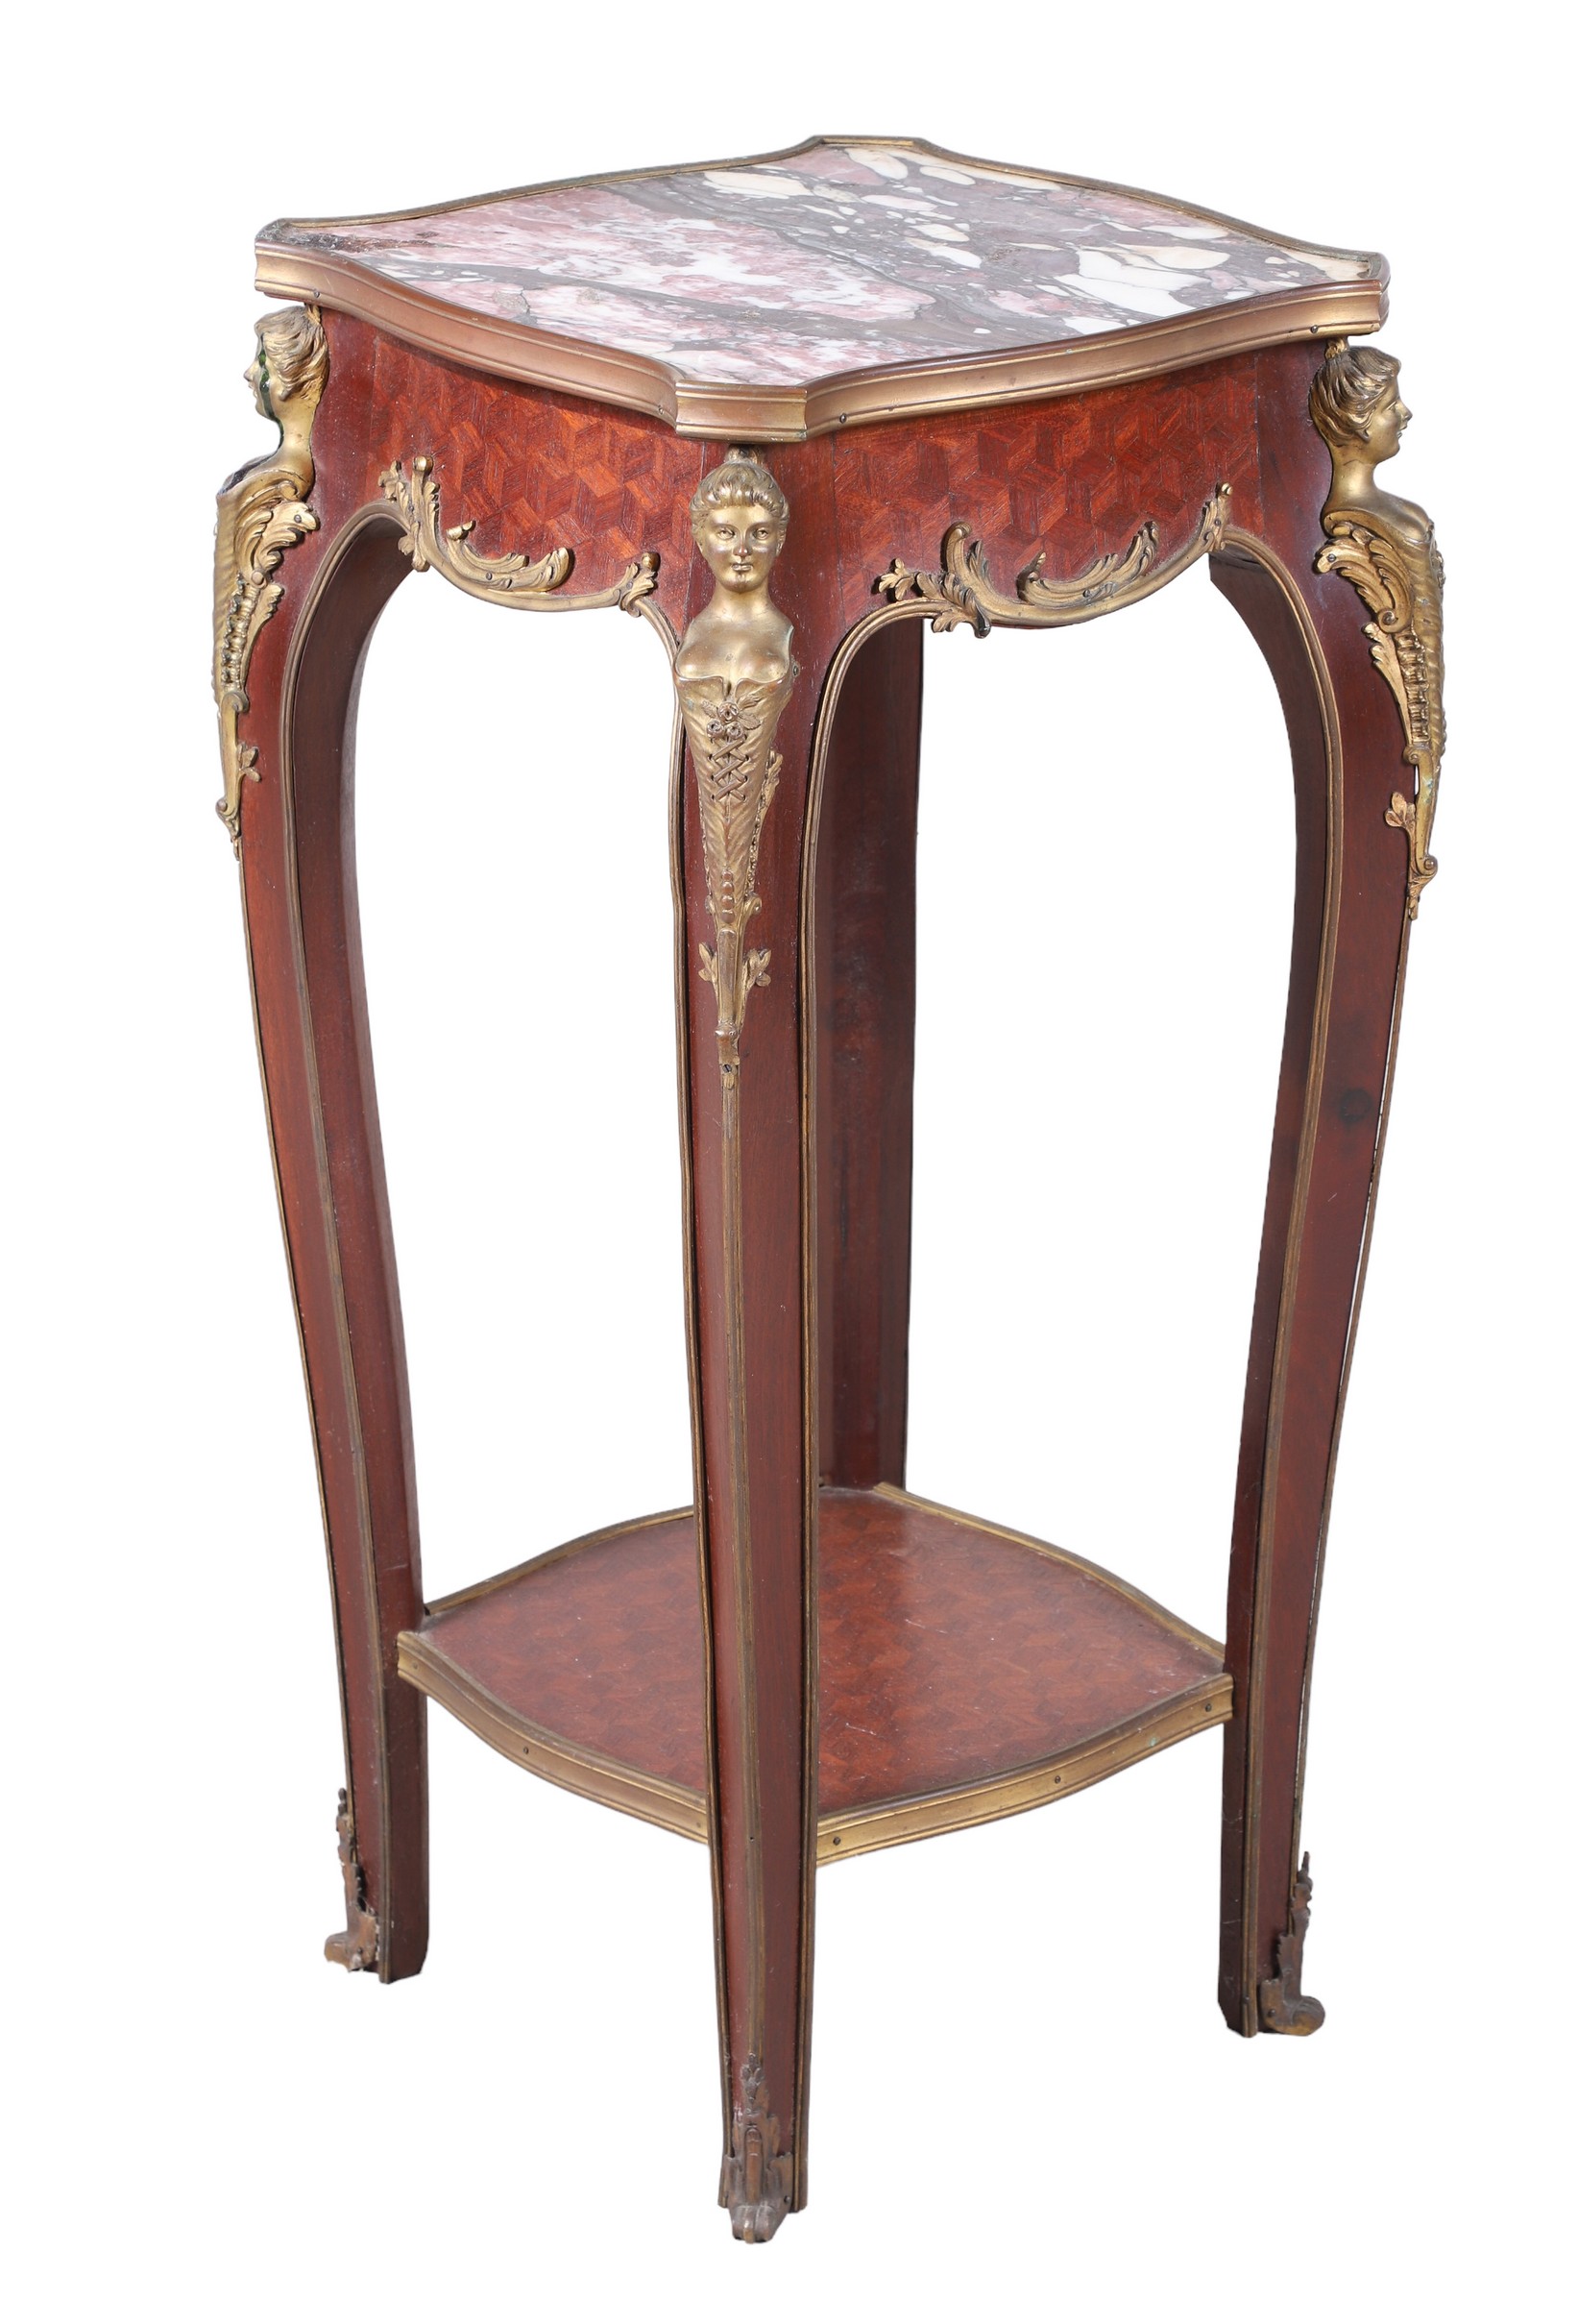 Louis XV style marbletop inlaid 2e0d5f